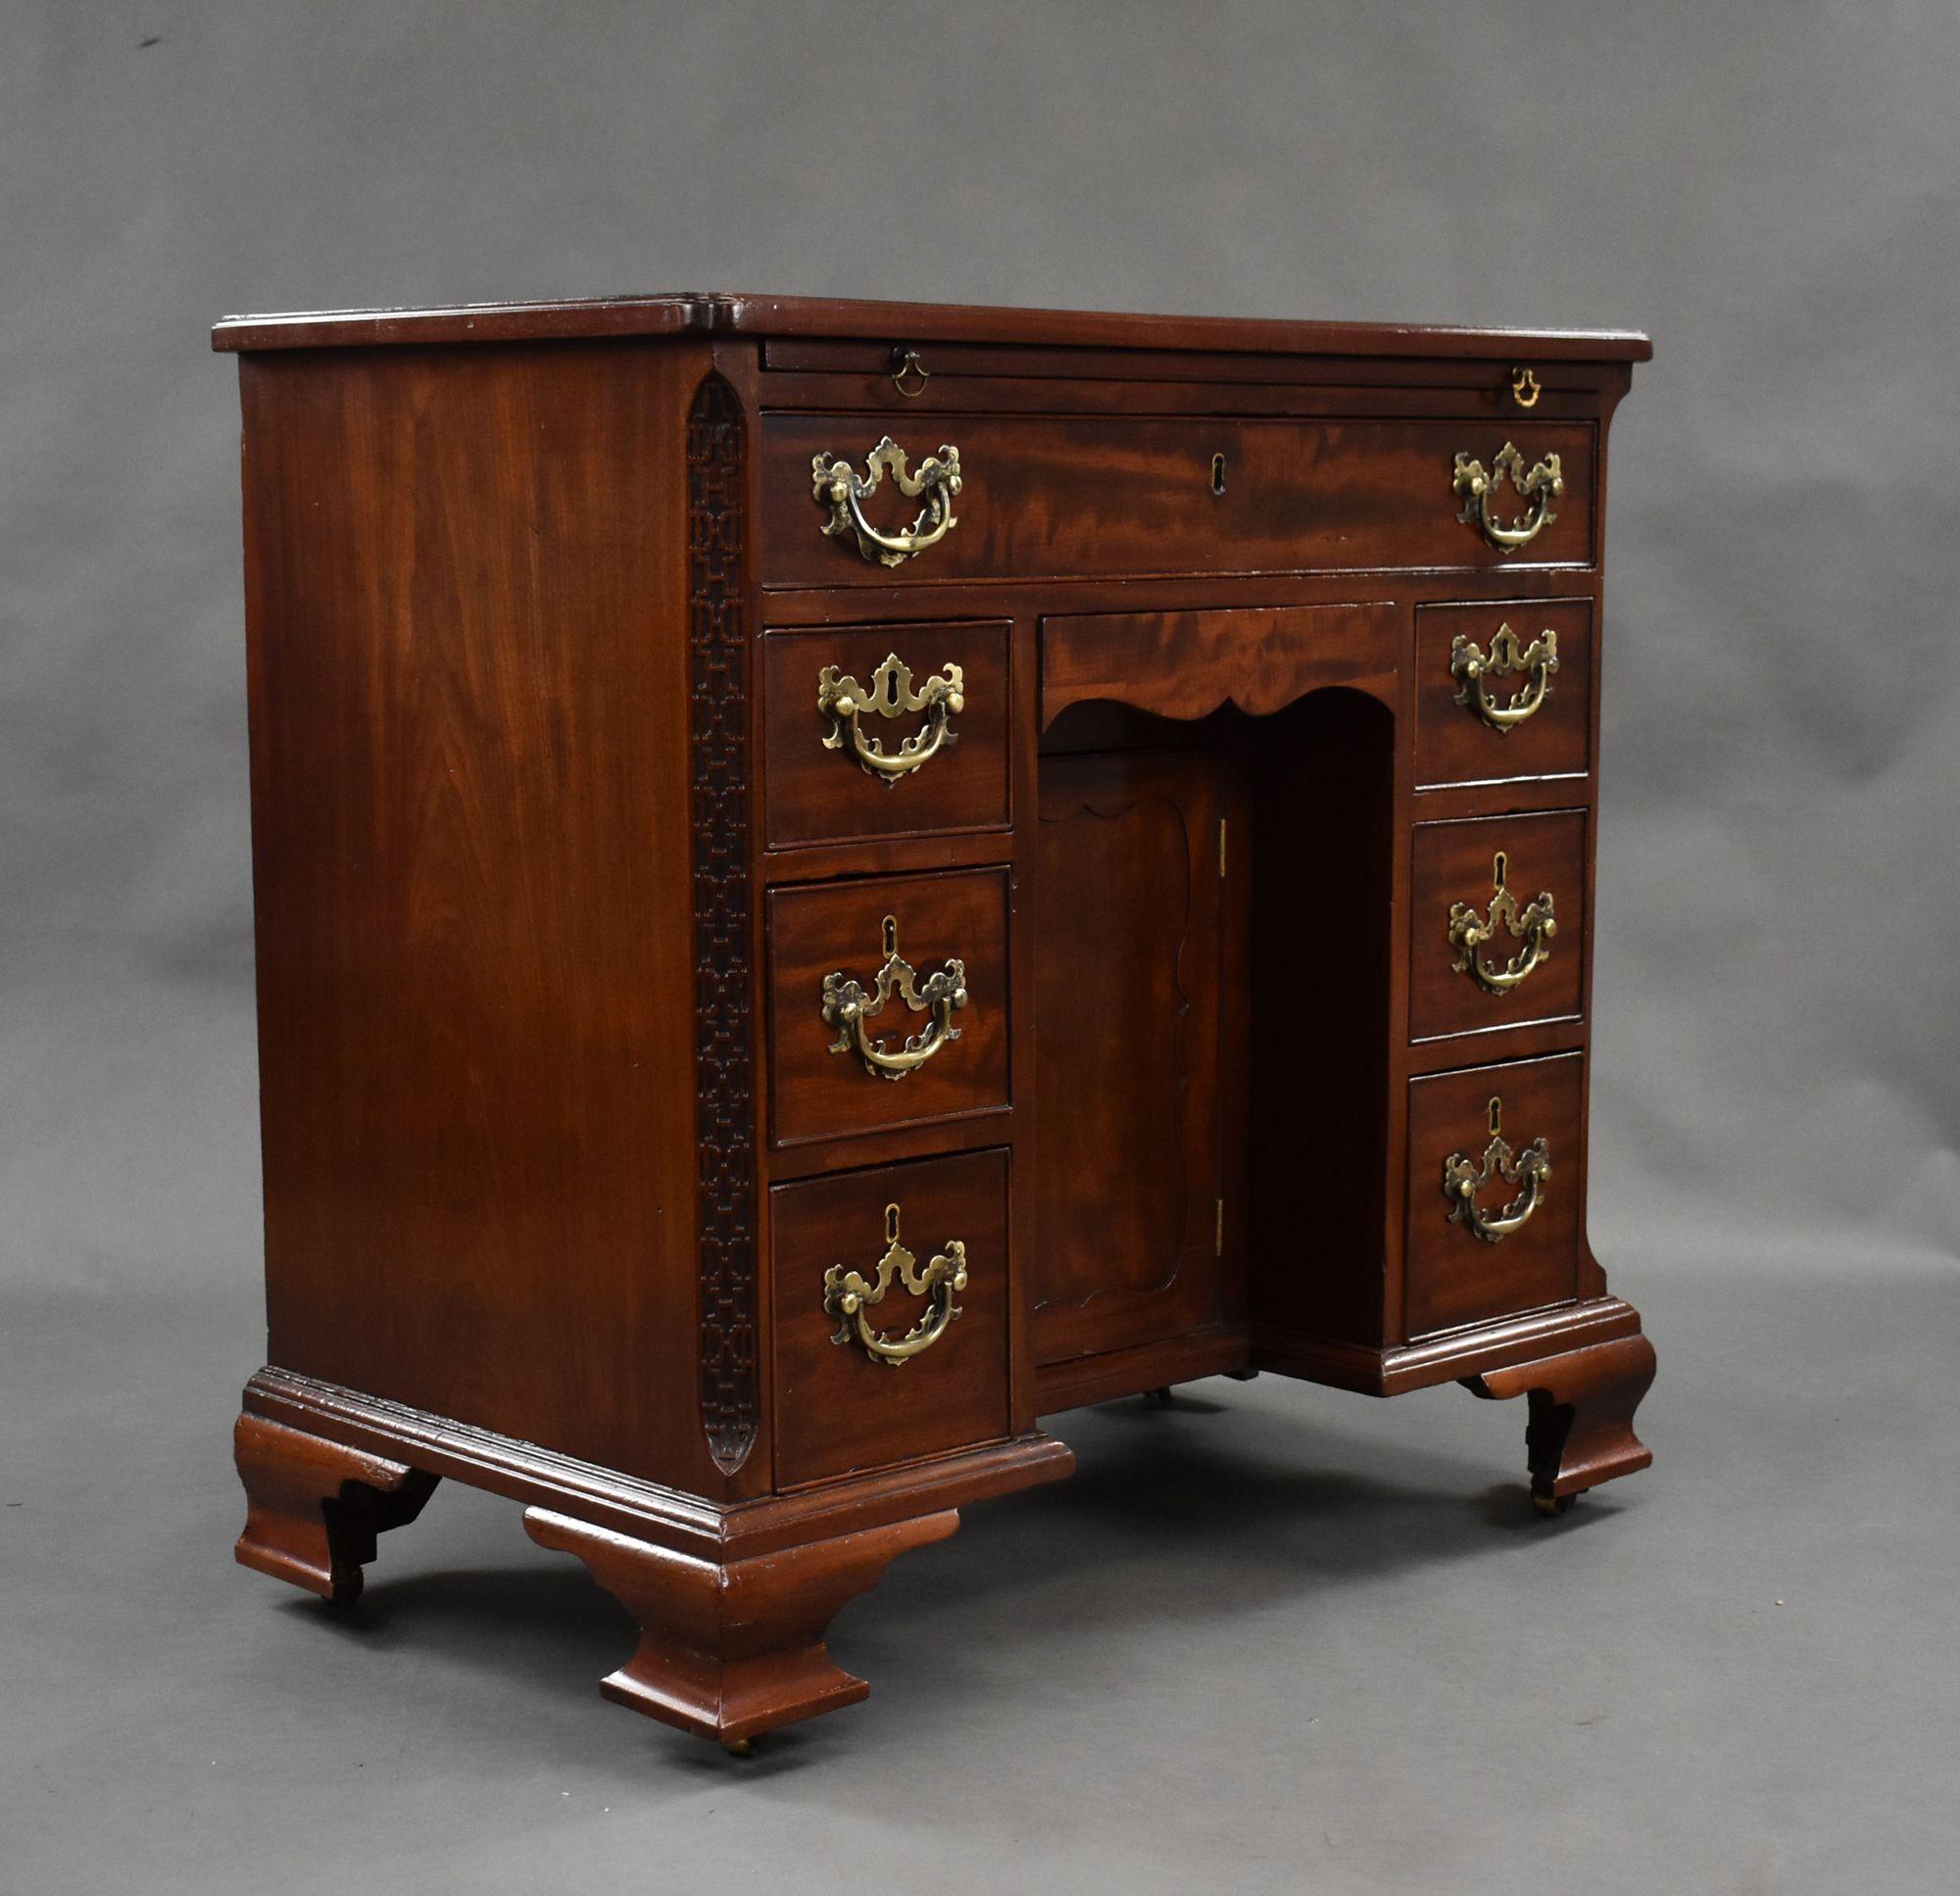 For sale is a very good quality 18th century George III mahogany kneehole desk, having a well figured mahogany top, above a brushing slide with a single drawer below. The desk has a central cupboard with drawers on either side, flanked by ornate